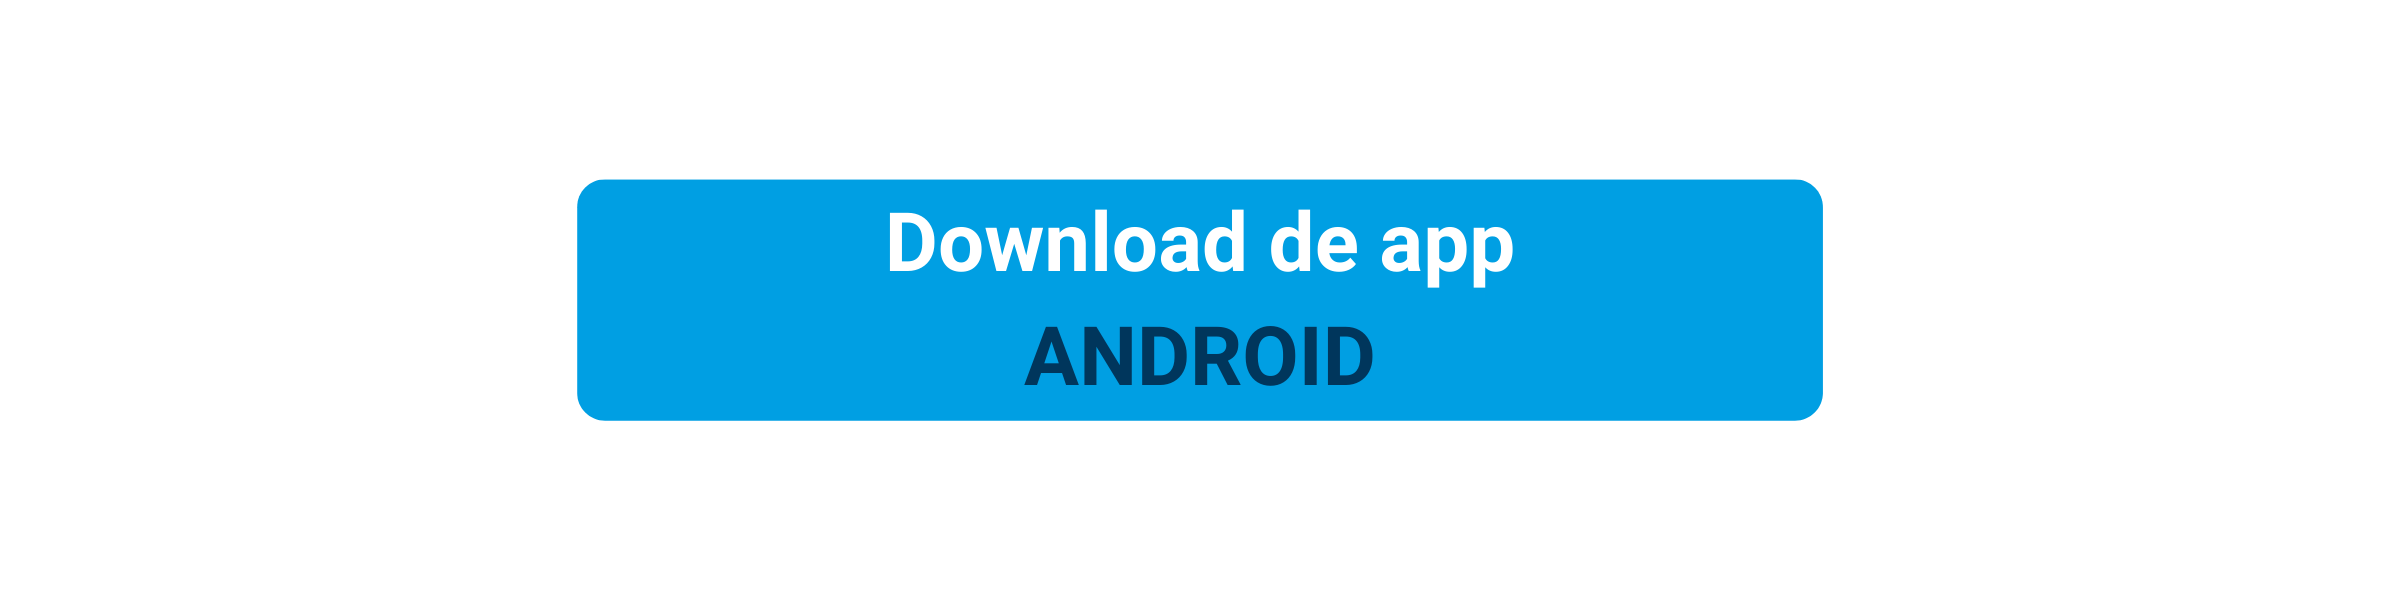 CTA_download_Android_NL.png